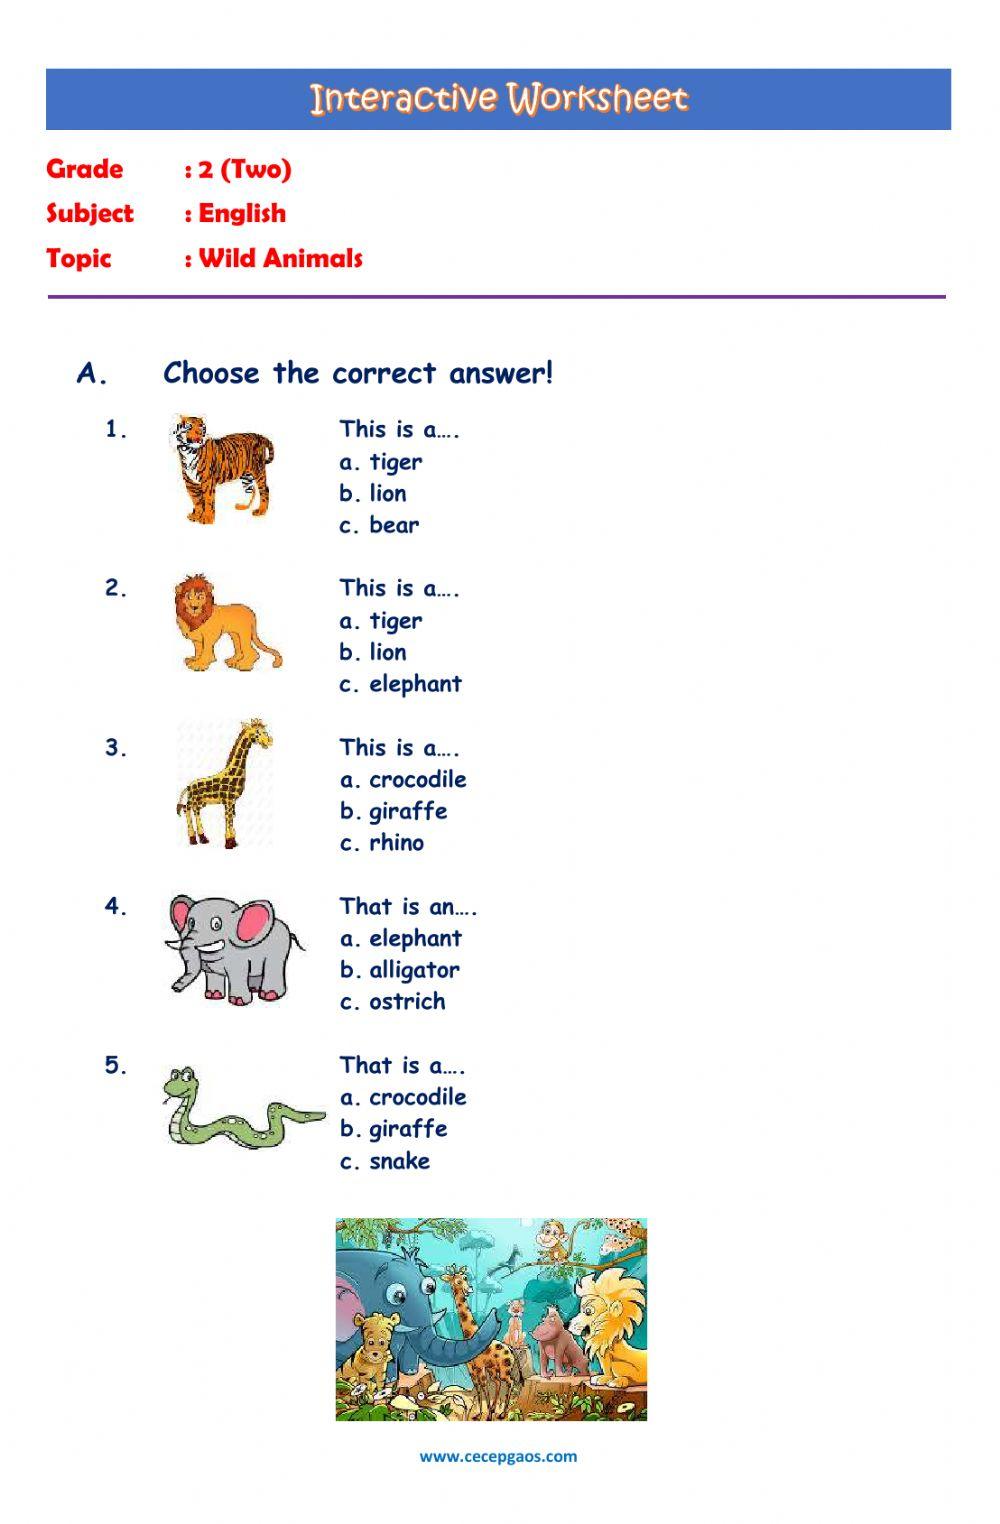 English Interactive Worksheet about Animals